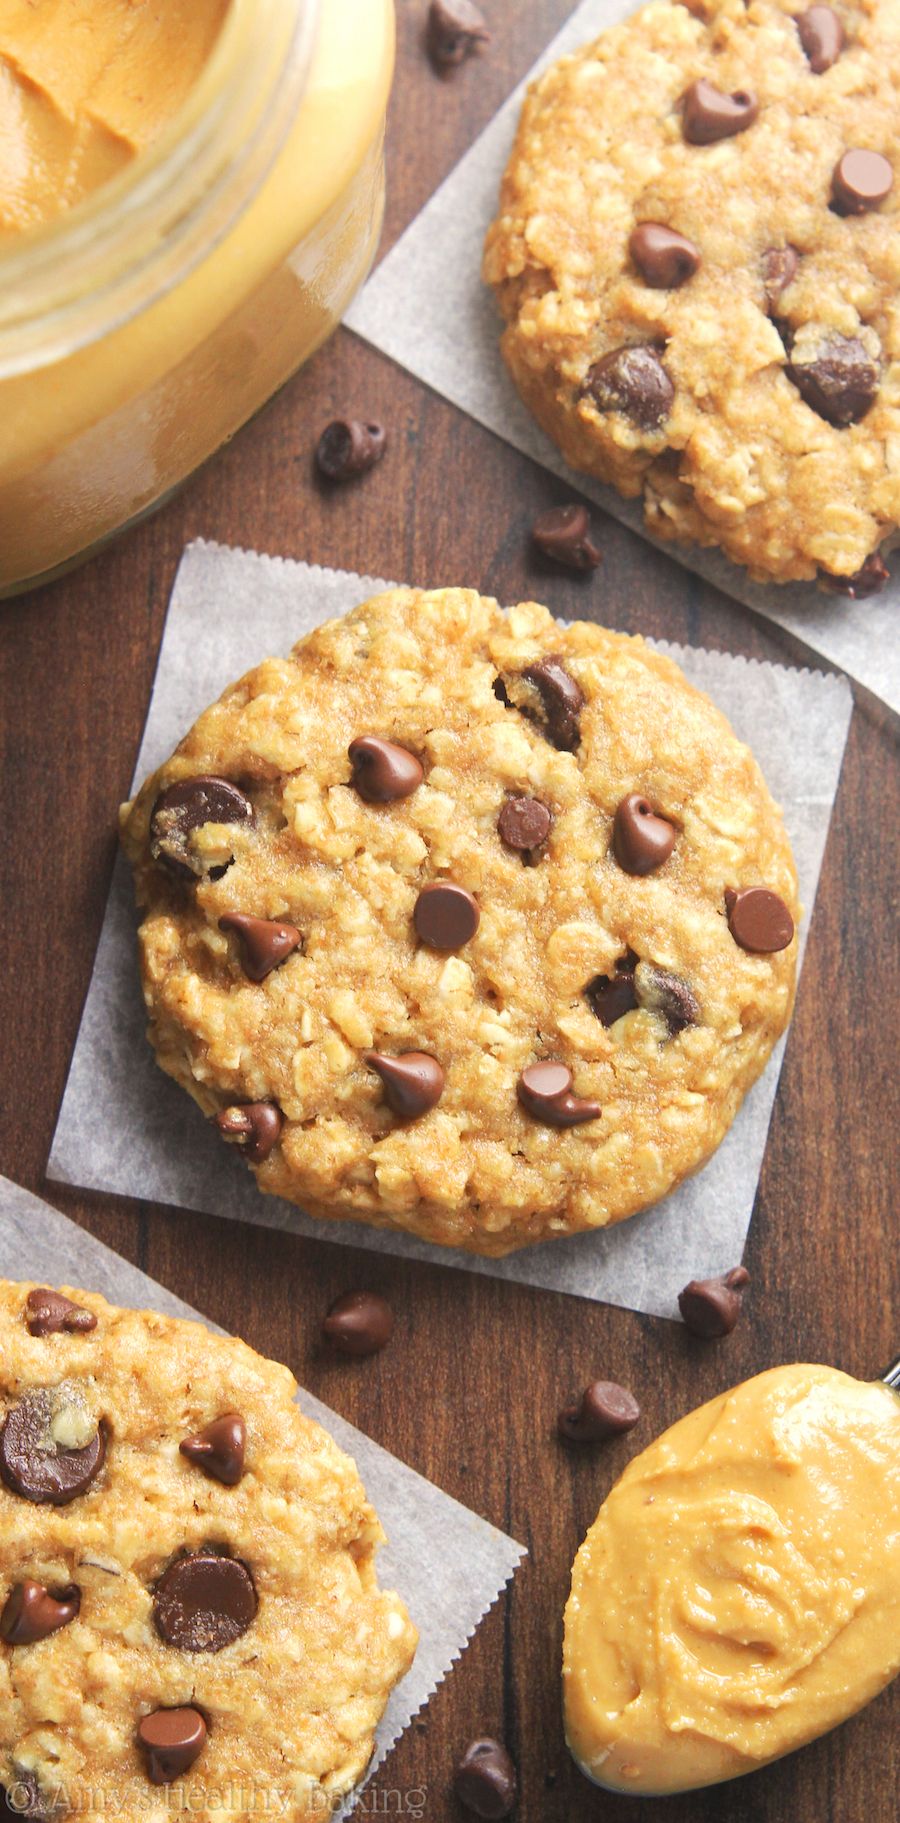 Chocolate chip peanut butter oatmeal cookies| 25+ peanut butter and chocolate desserts